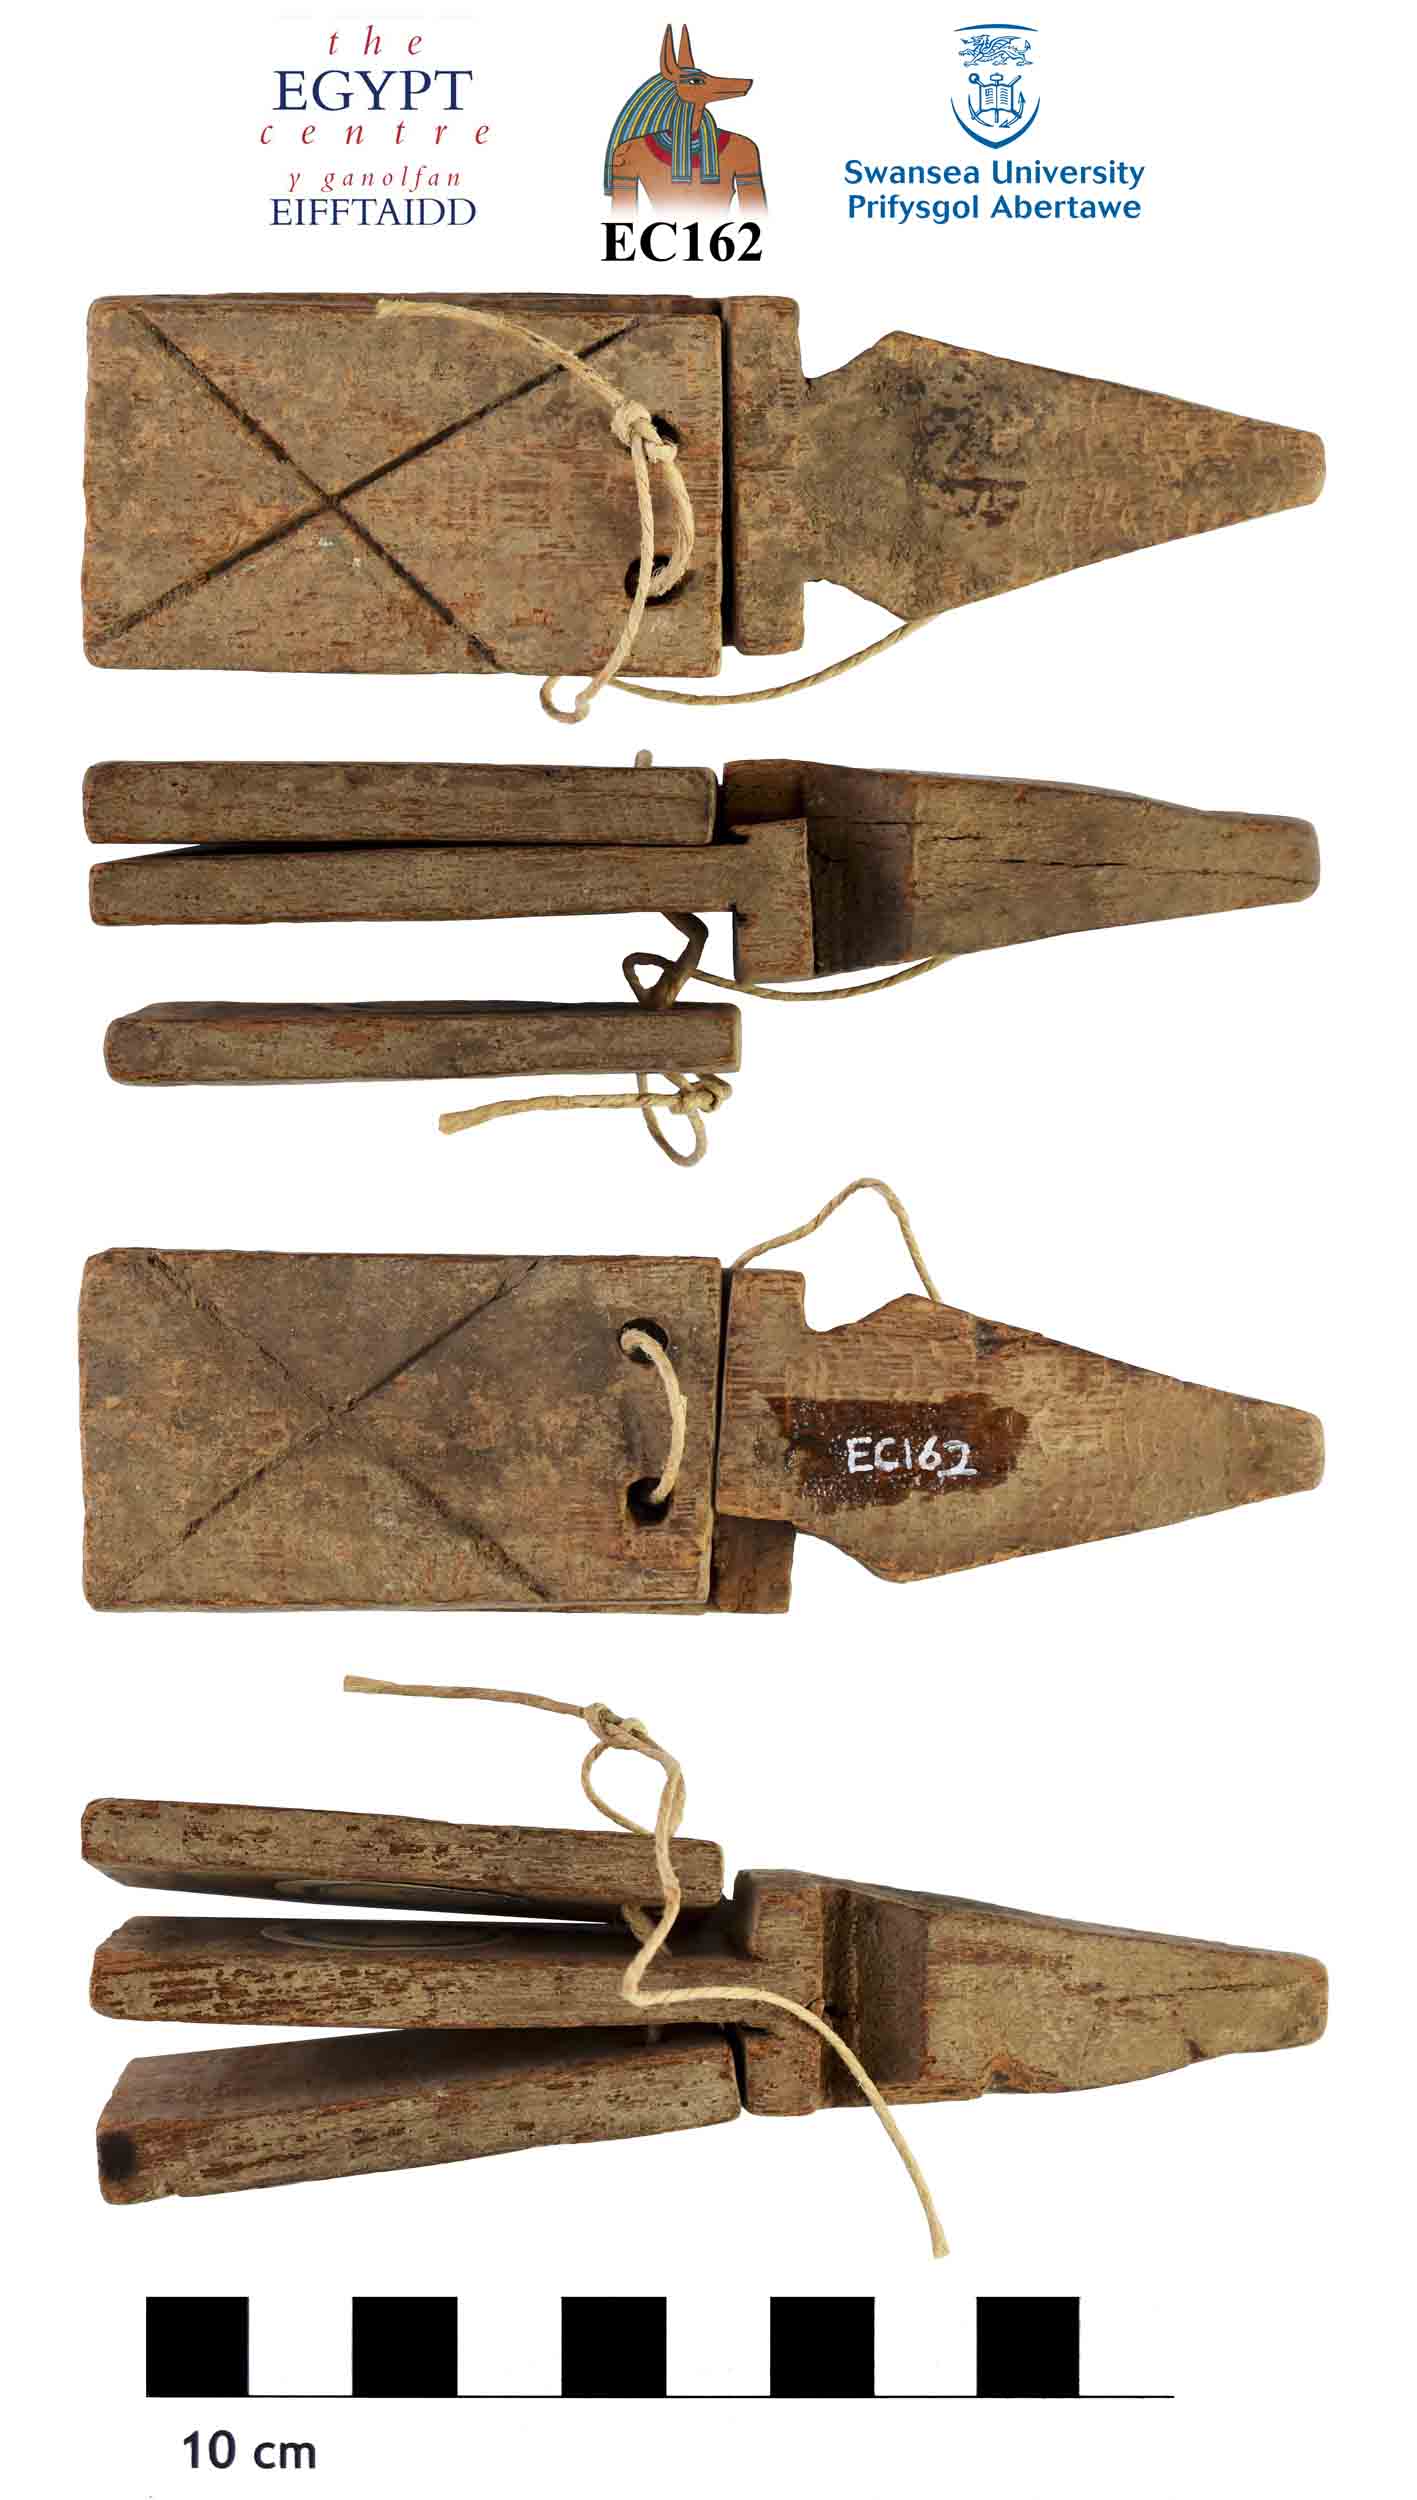 Image for: Wooden clapper